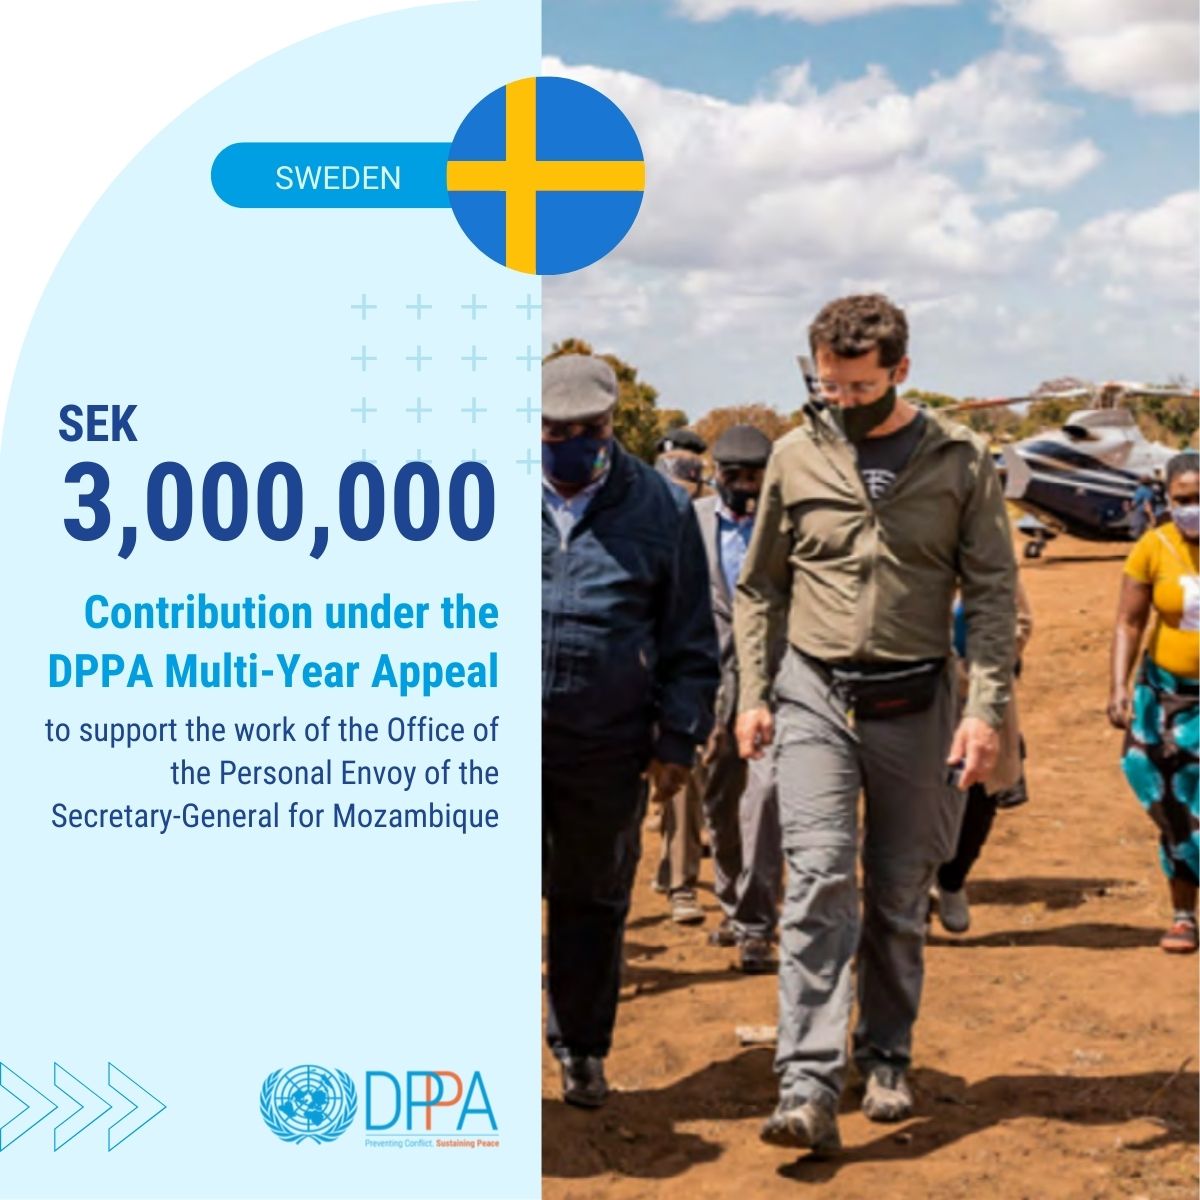 Tack så mycket, #Sweden, for your voluntary contribution of SEK 3 million to DPPA’s Multi-Year Appeal, which will support the work of the Personal Envoy of the Secretary-General for #Mozambique. #SupportDPPA dppa.un.org/en/funding